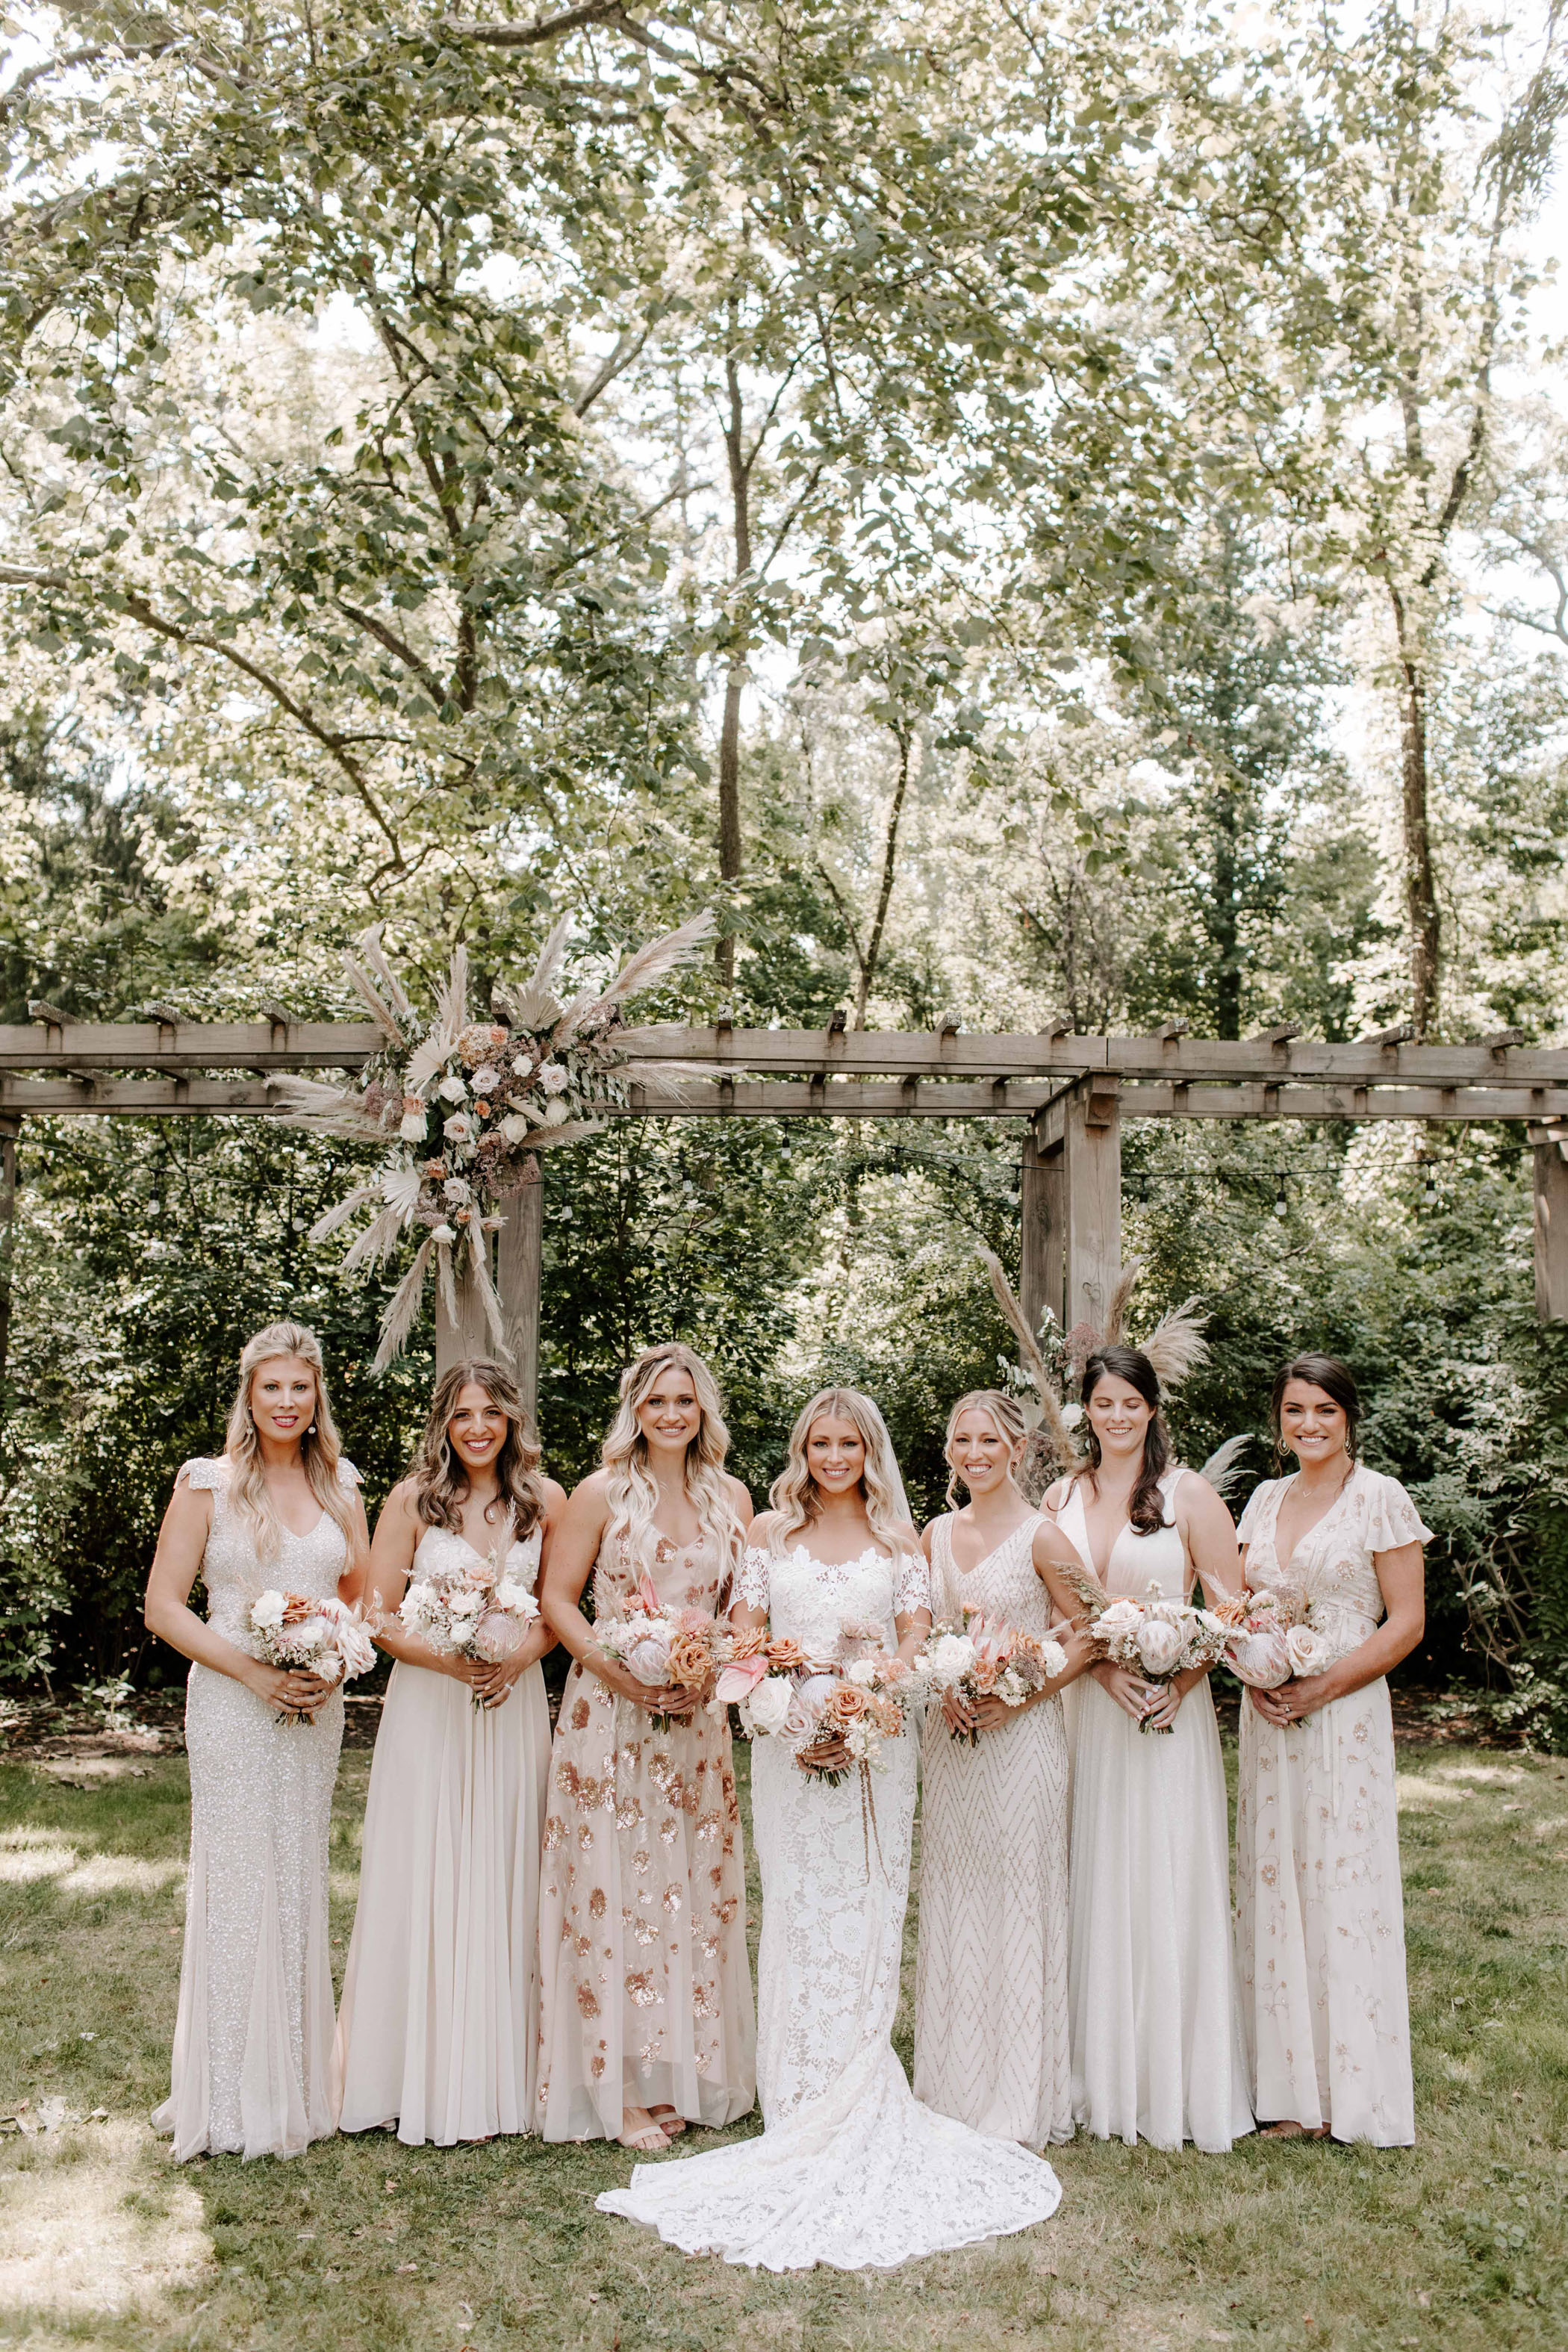 Brides and bridesmaids posing in blush and champagne dresses